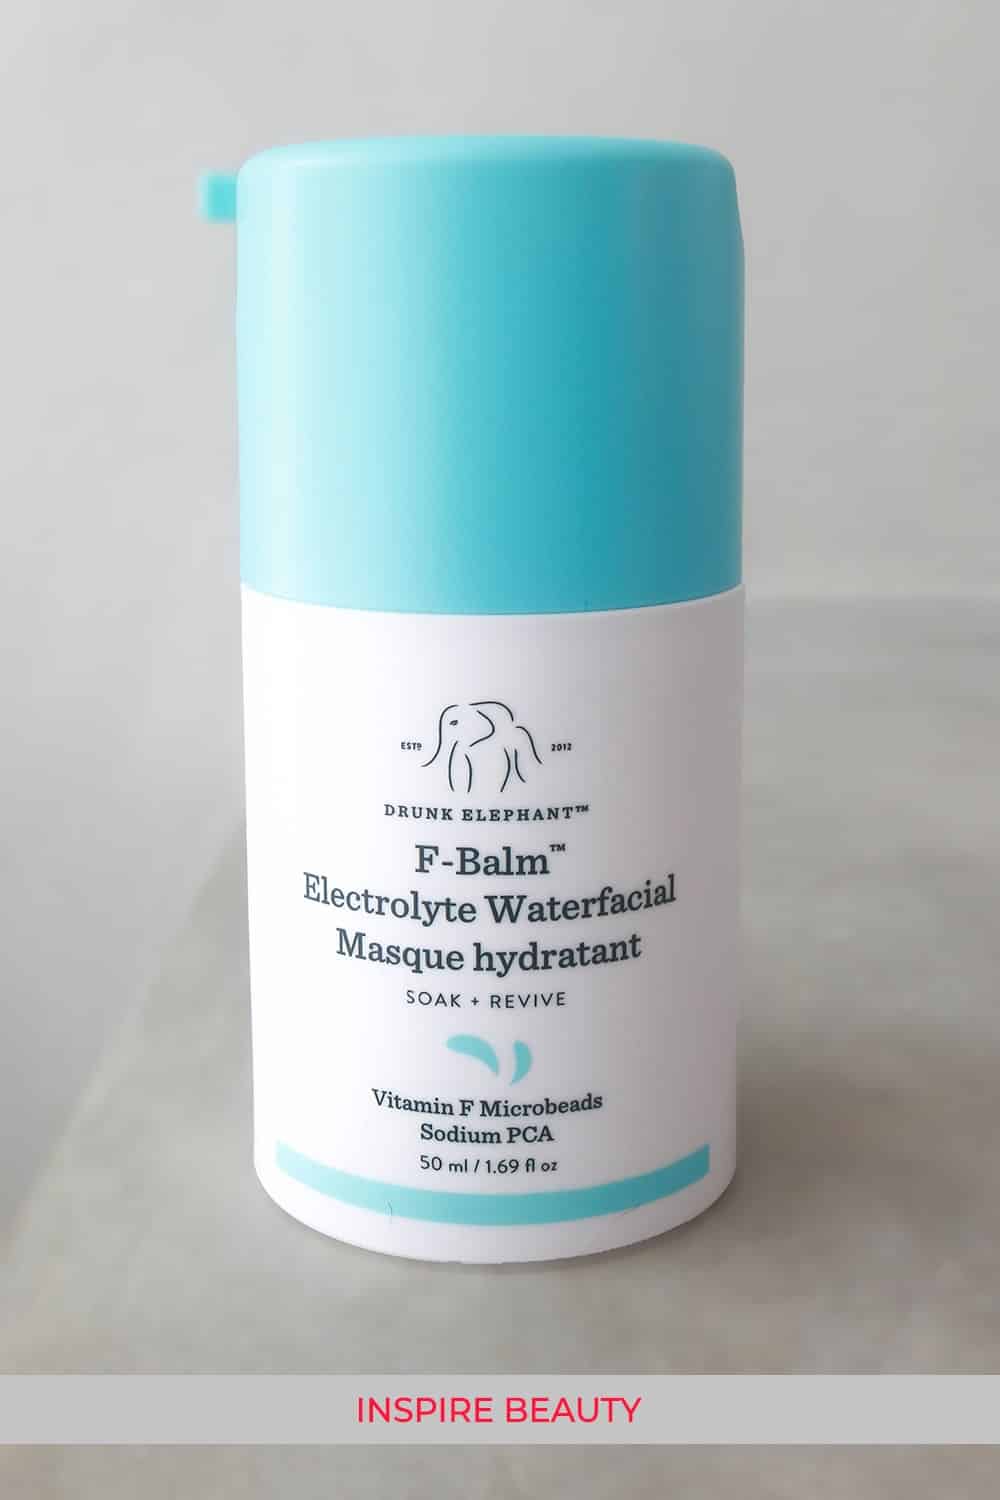 Drunk Elephant F-Balm Electrolyte Waterfacial review, this is gentle, hydrating, and works great with the TLC Framboos Night Serum